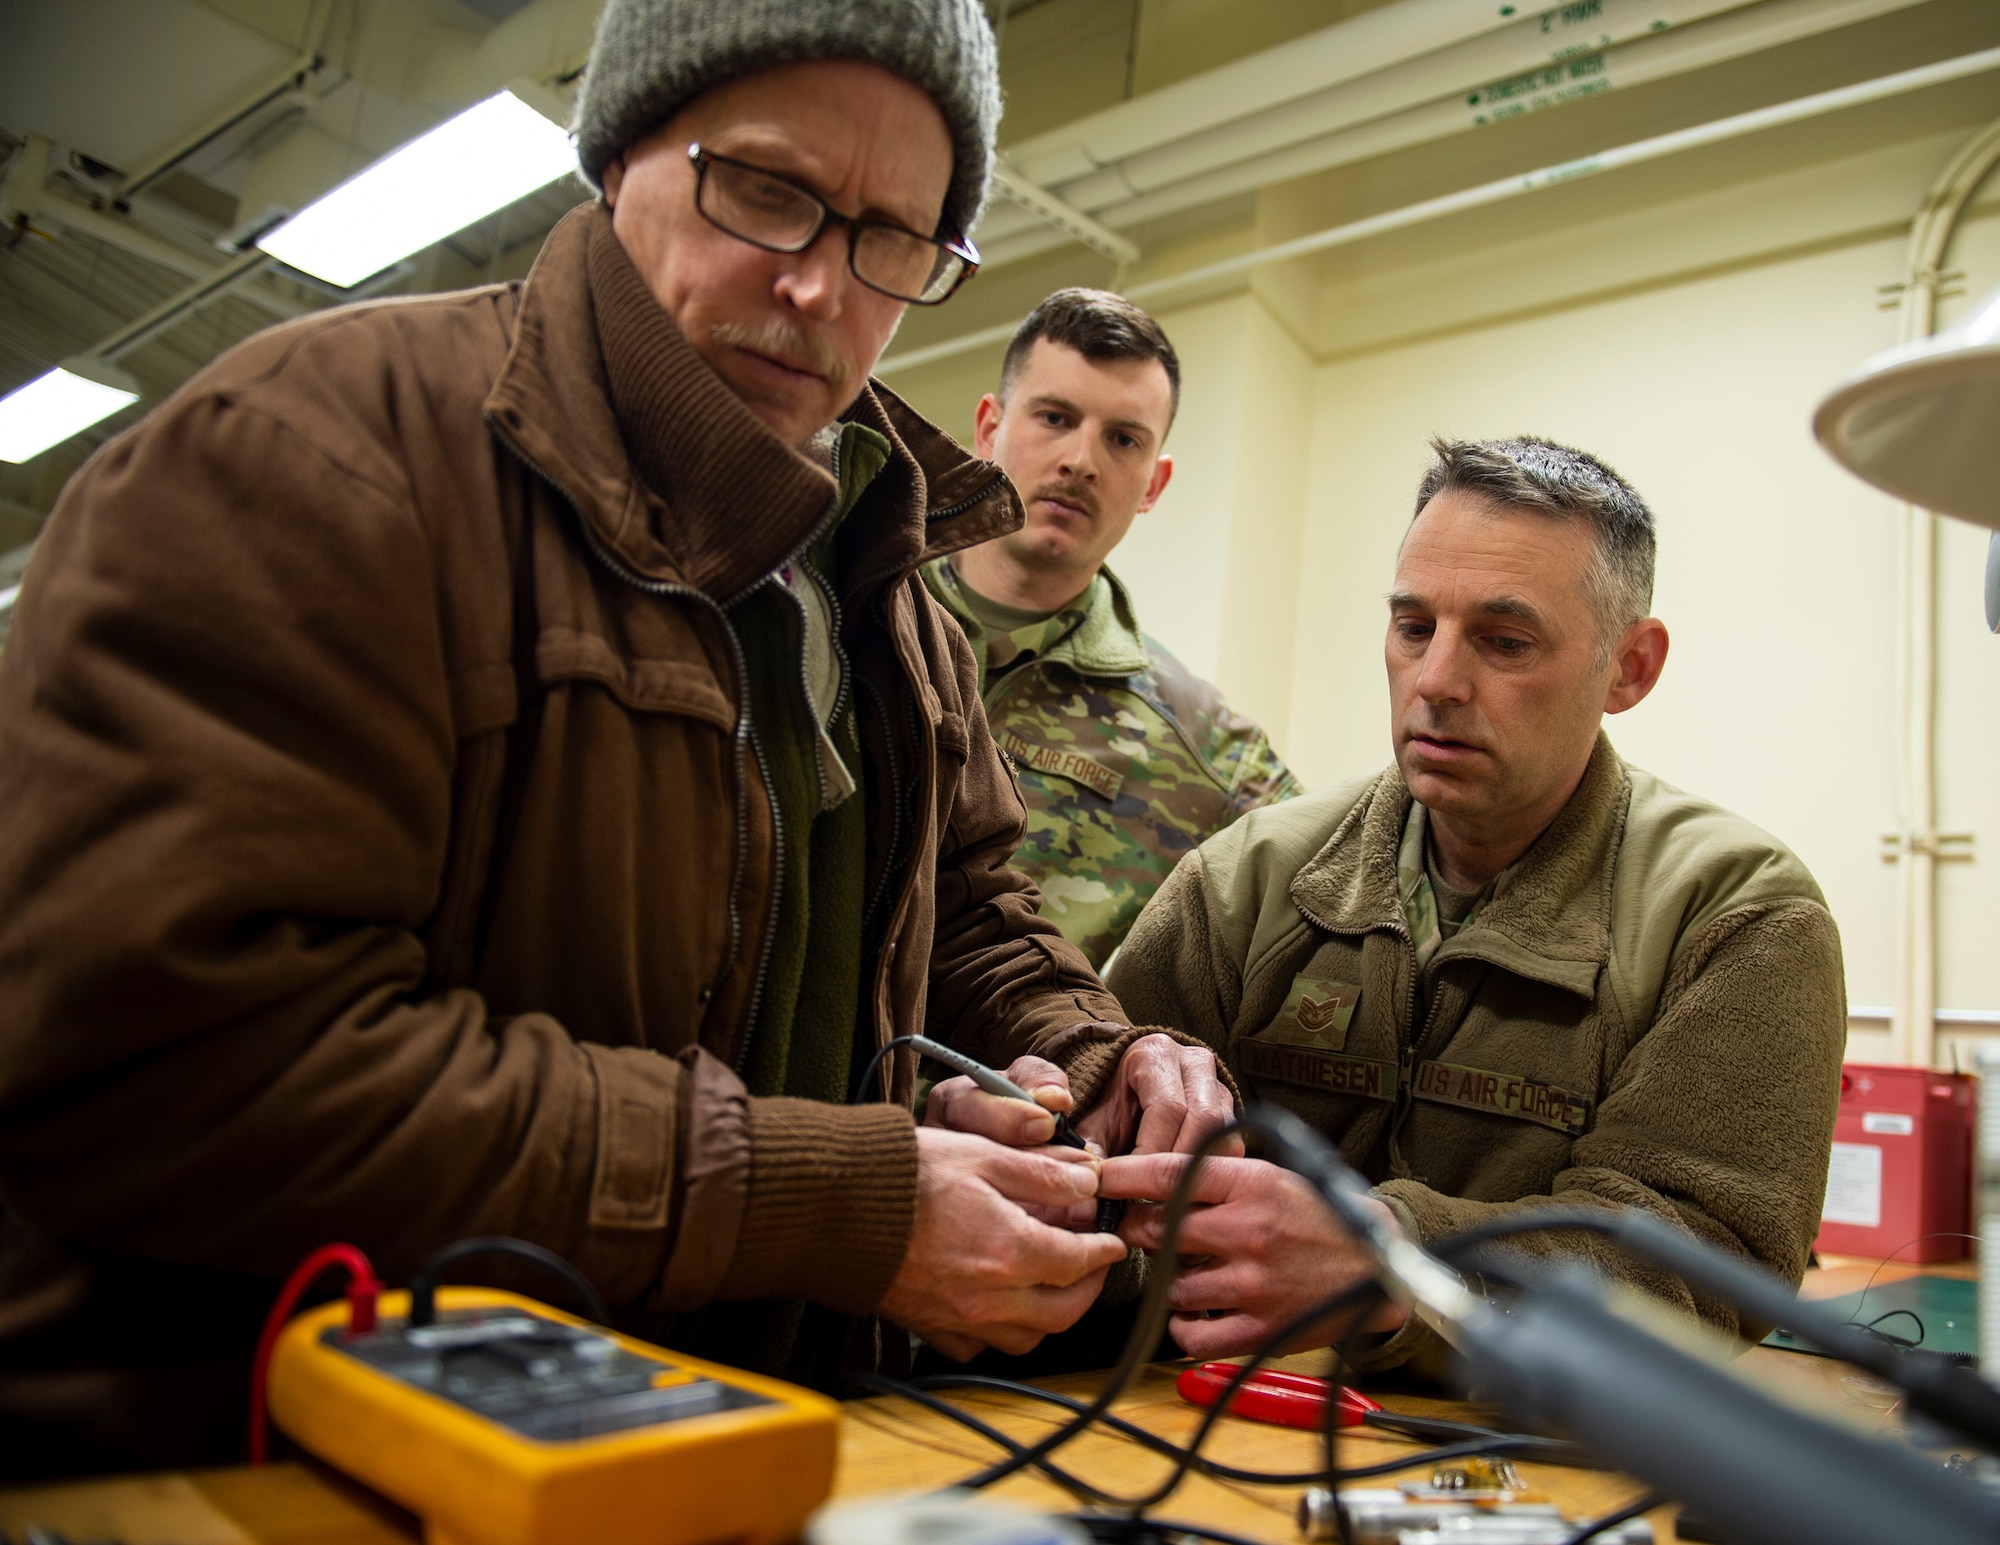 David Bethel, left, an engineer from Robbins Air Force Base, U.S. Air Force Tech. Sgt. Kyle Mayer, center, and U.S. Air Force Tech. Sgt. Scott Mathisen, right, 133rd Maintenance Squadron, test the micro unit on a trimming status panel in St. Paul, Minn., April 7, 2022.